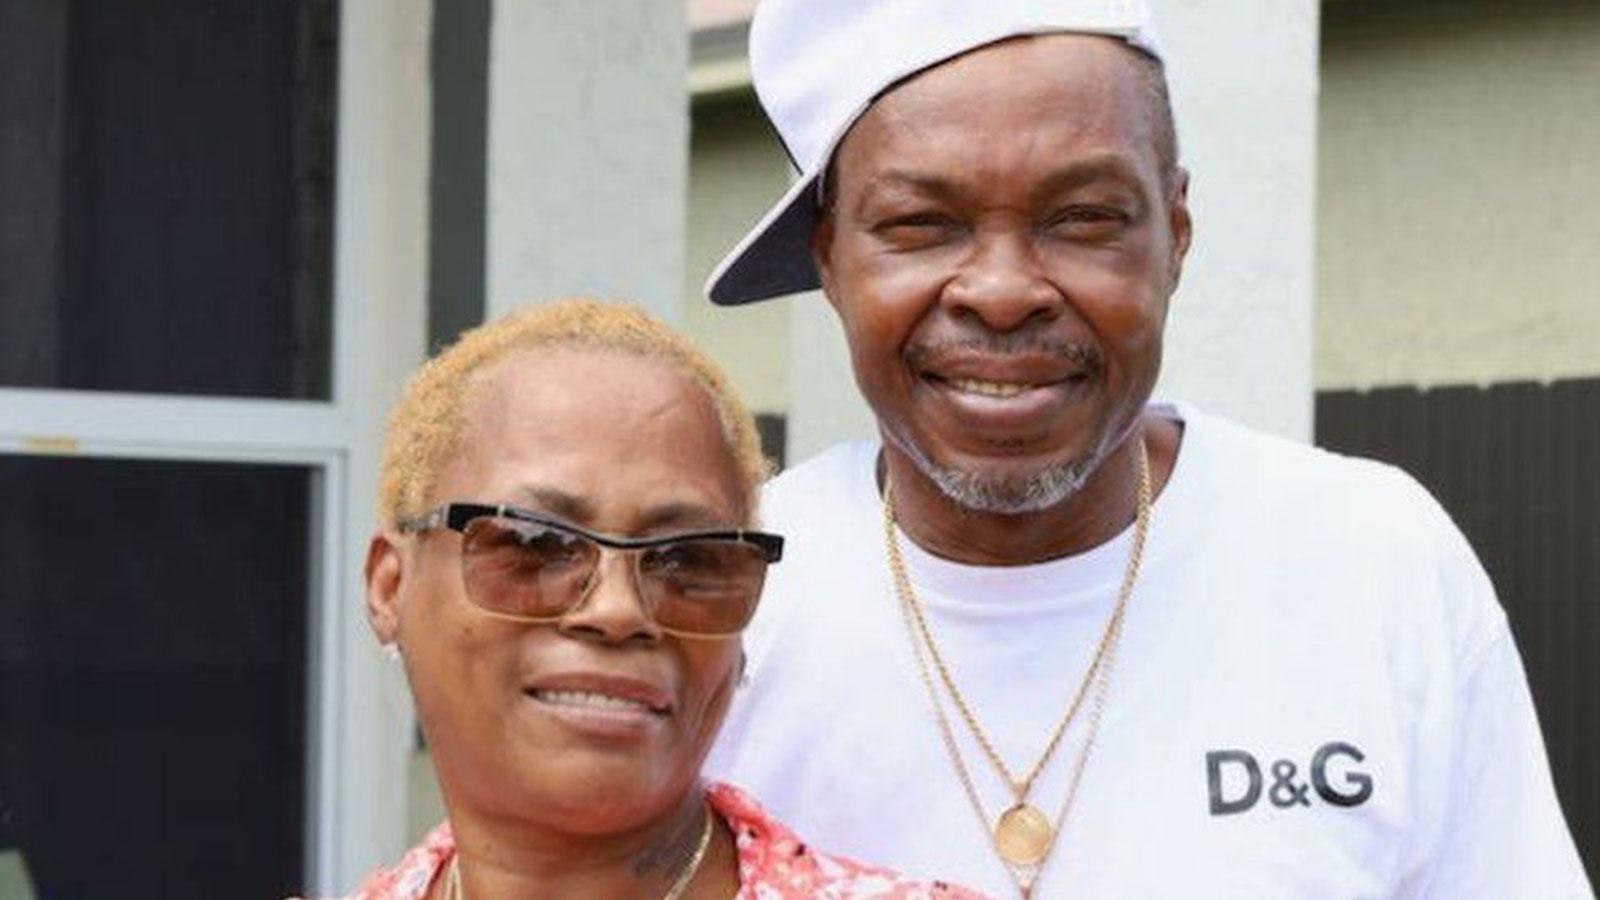 Jacqueline Wilcox, pictured with her husband Wilbert, says owning her own home has given her both stability and freedom